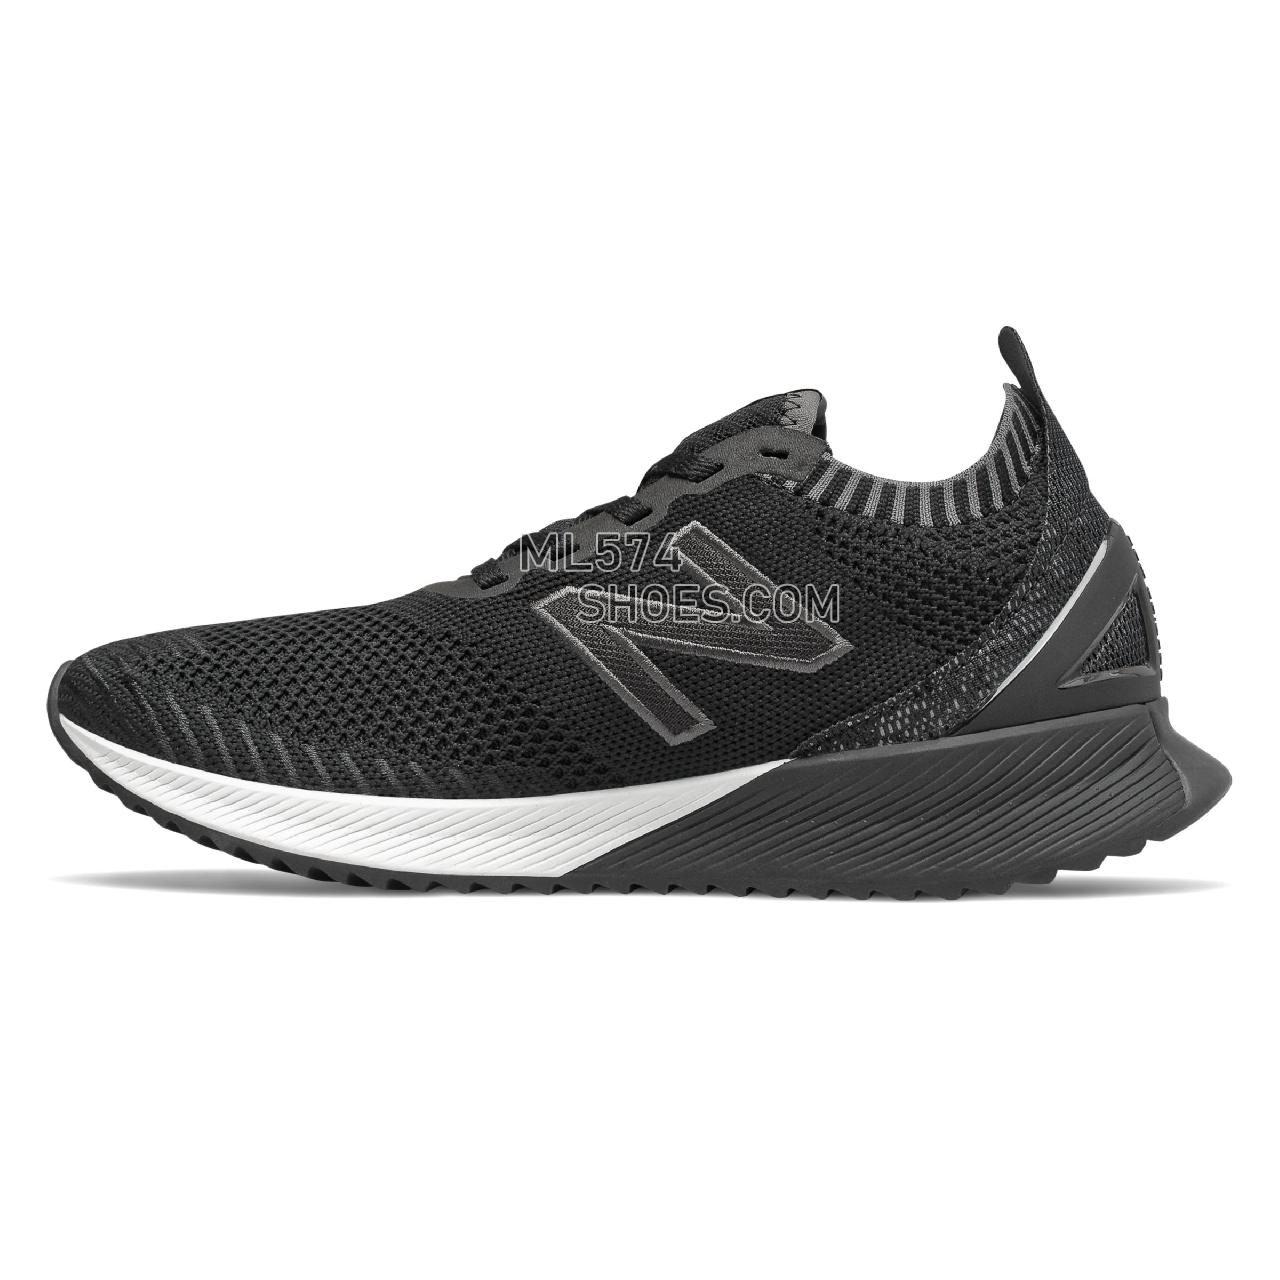 New Balance FuelCell Echo - Women's Neutral Running - Black with Magnet and White - WFCECSK